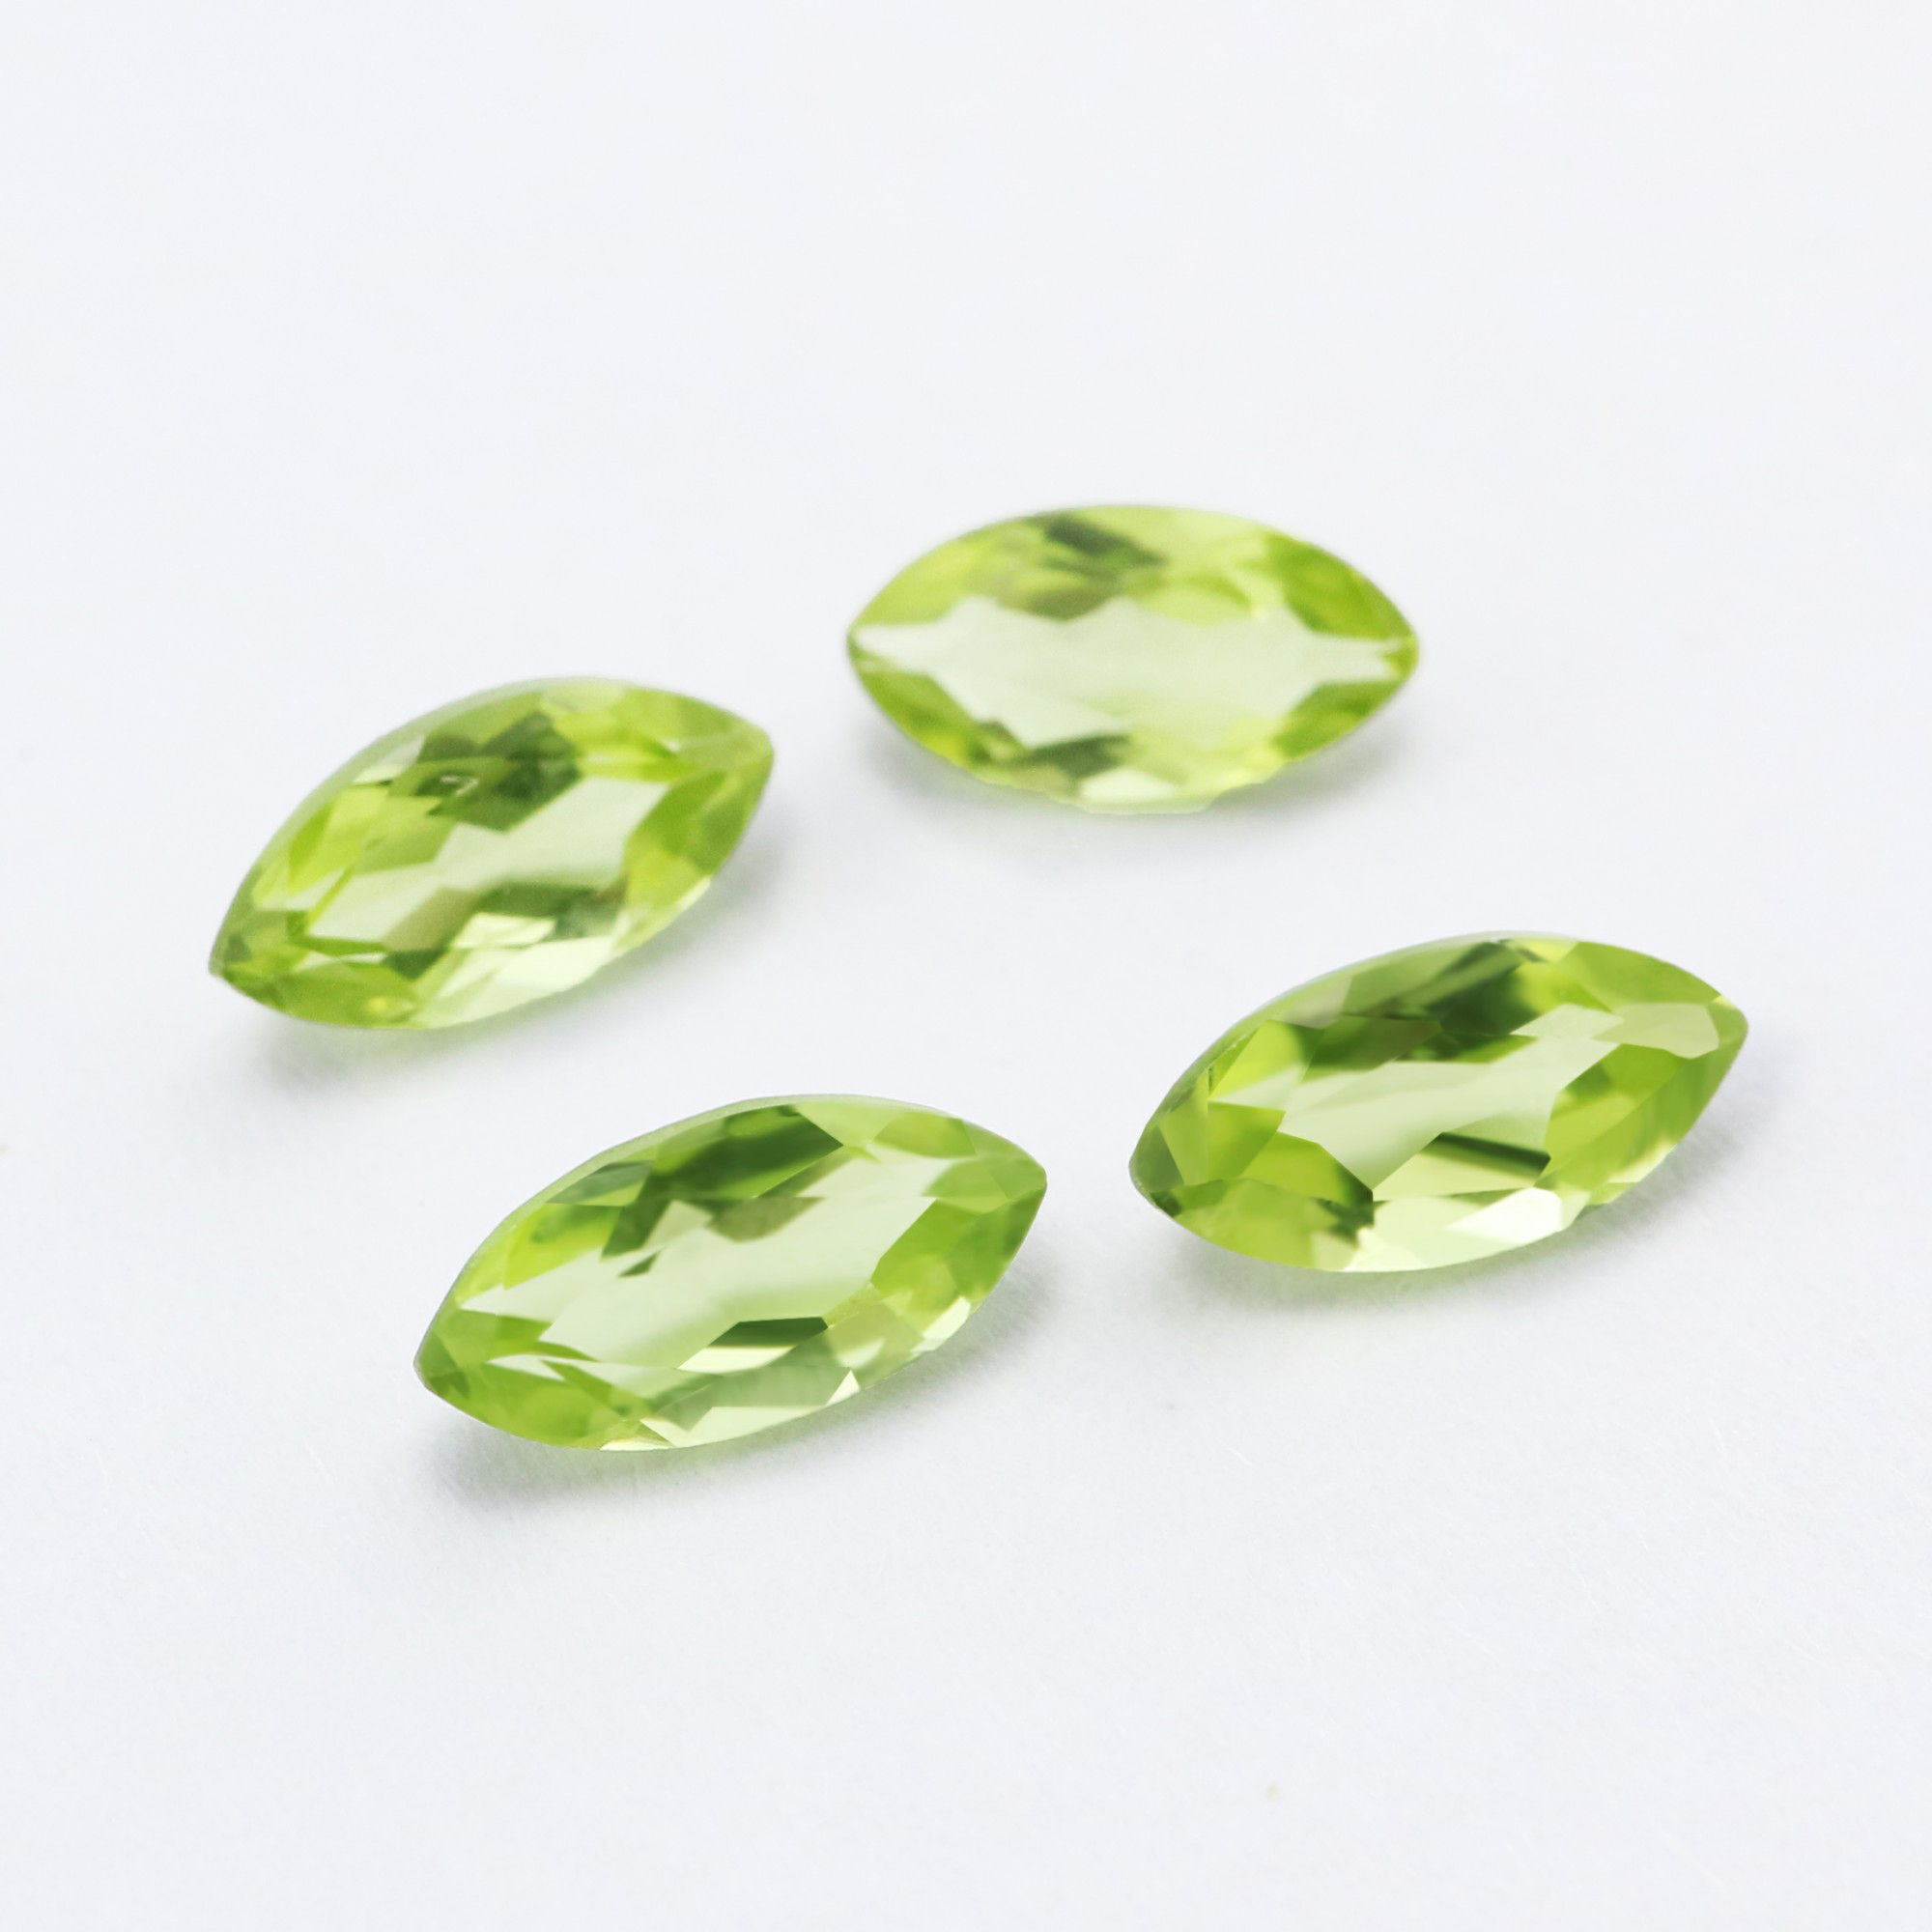 5Pcs Marquise Green Peridot August Birthstone Faceted Cut Loose Gemstone Natural Semi Precious Stone DIY Jewelry Supplies 4120130 - Click Image to Close